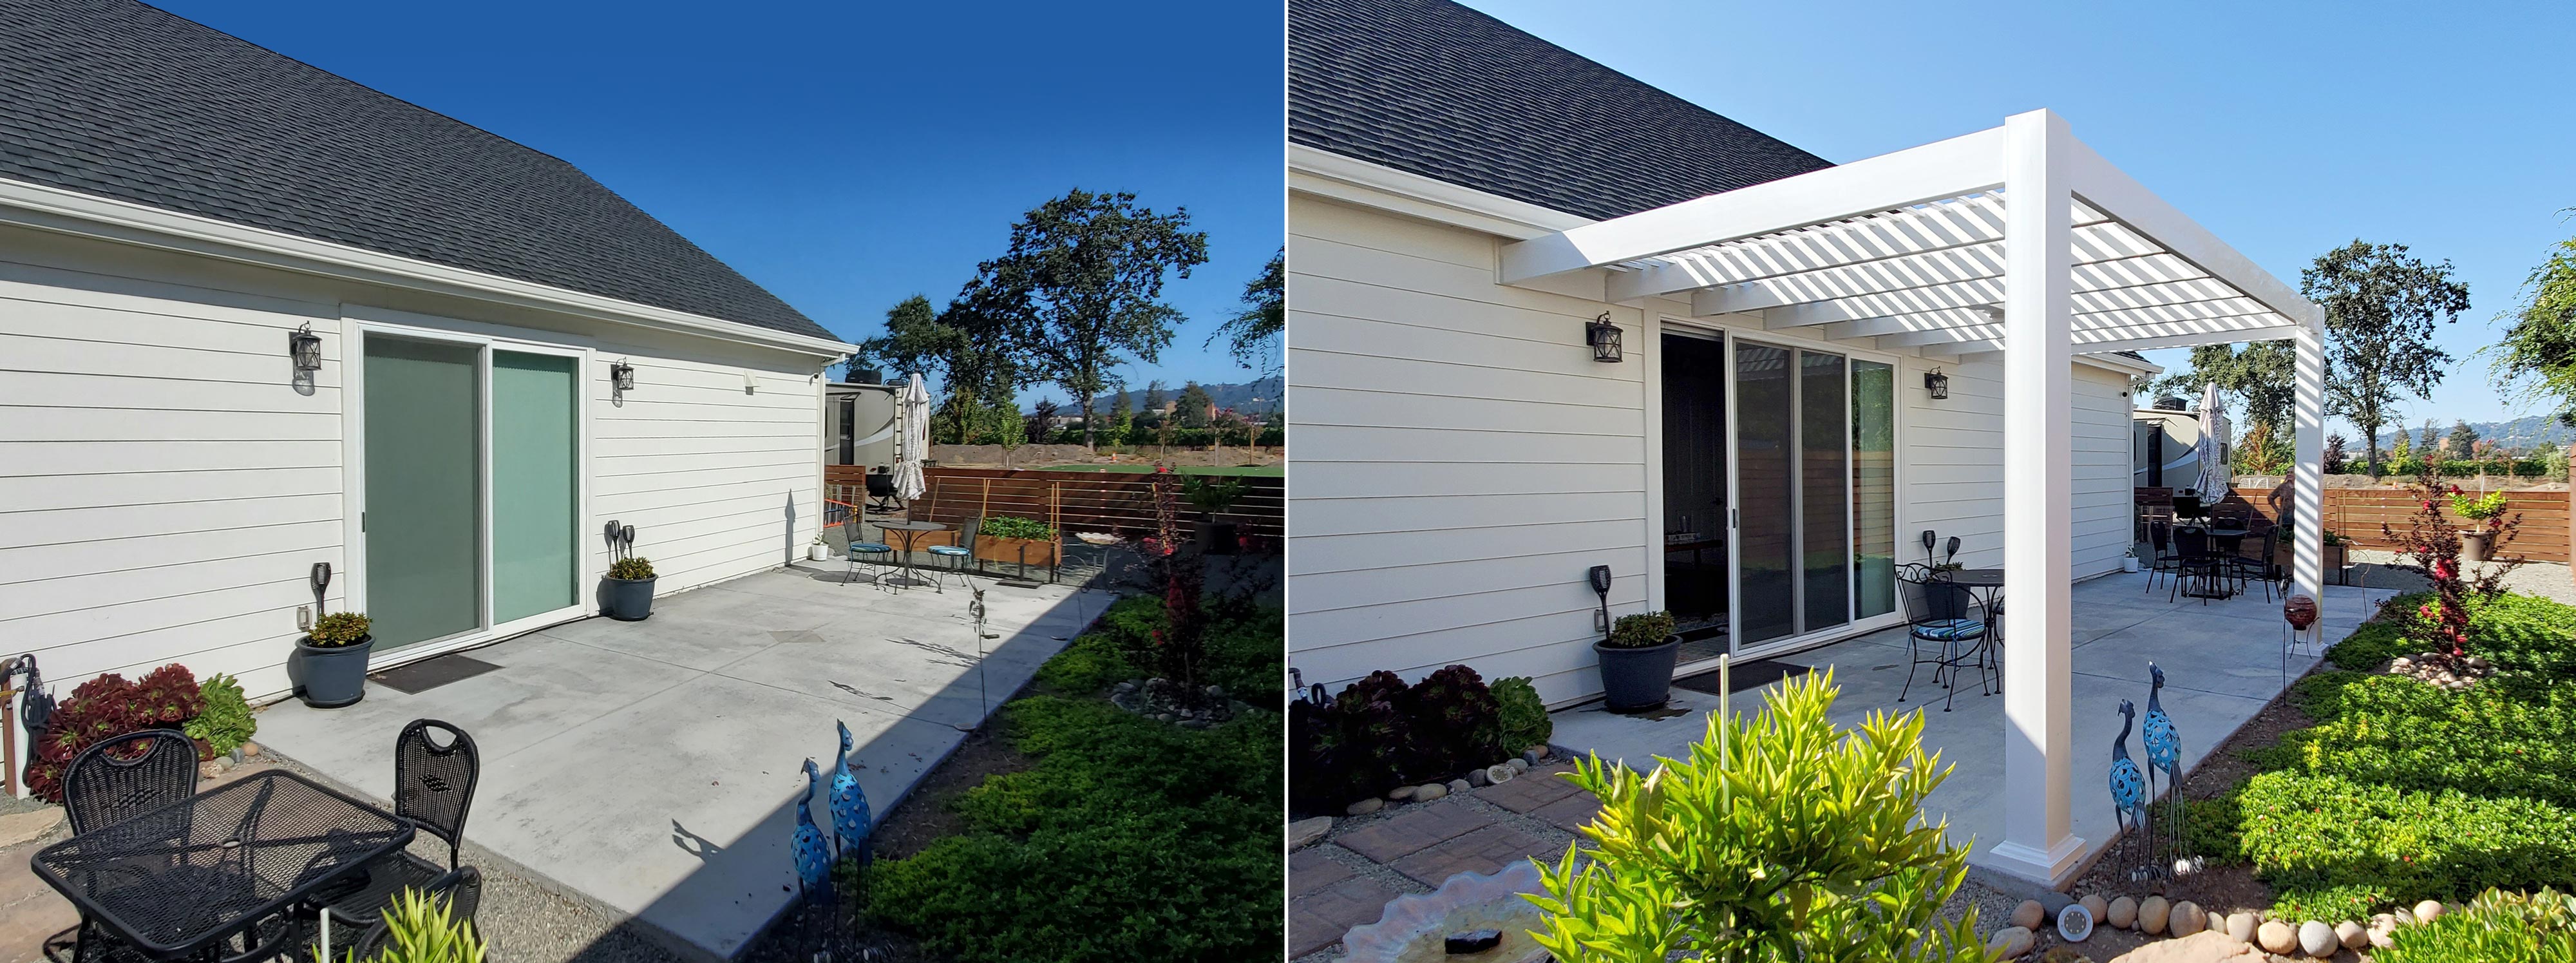 Before and after photo of a patio behind a white house with an attached pergola over the patio in the after photo